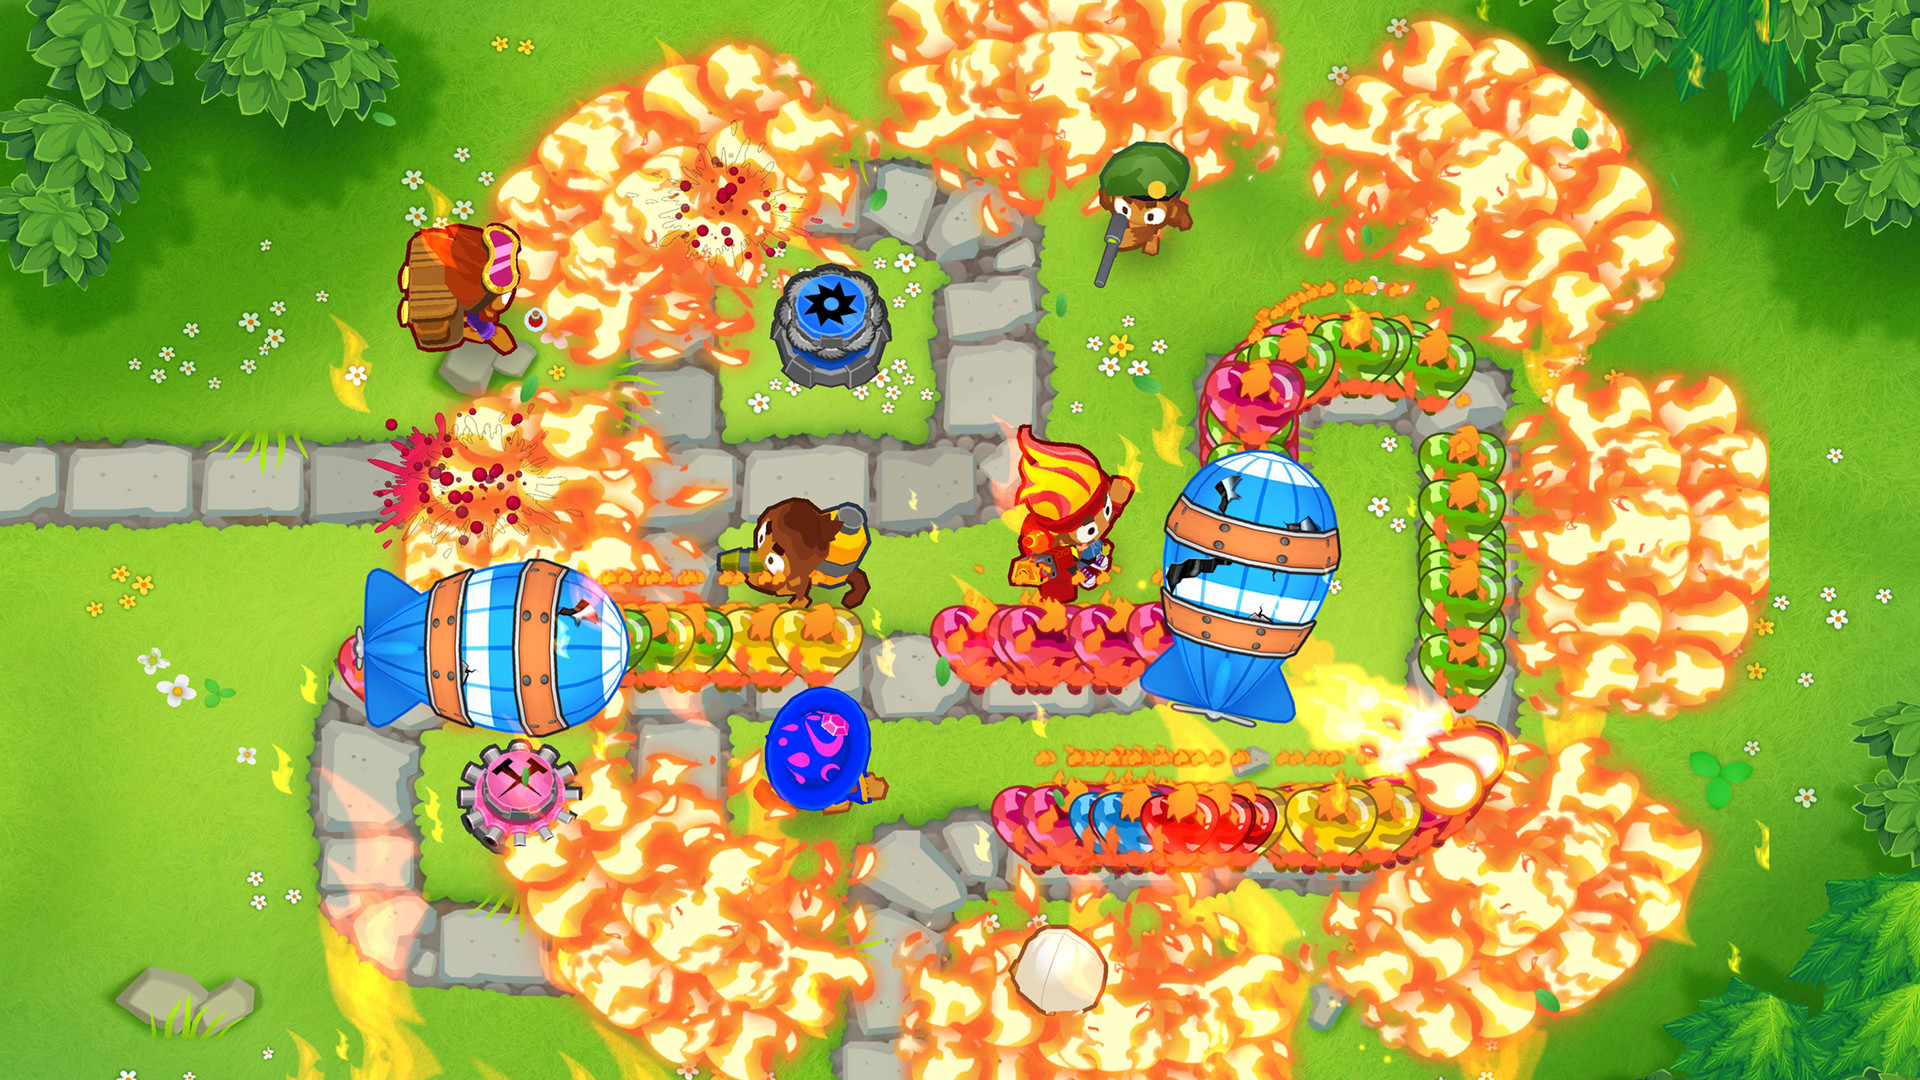 Video Game Bloons TD 6 Wallpaper